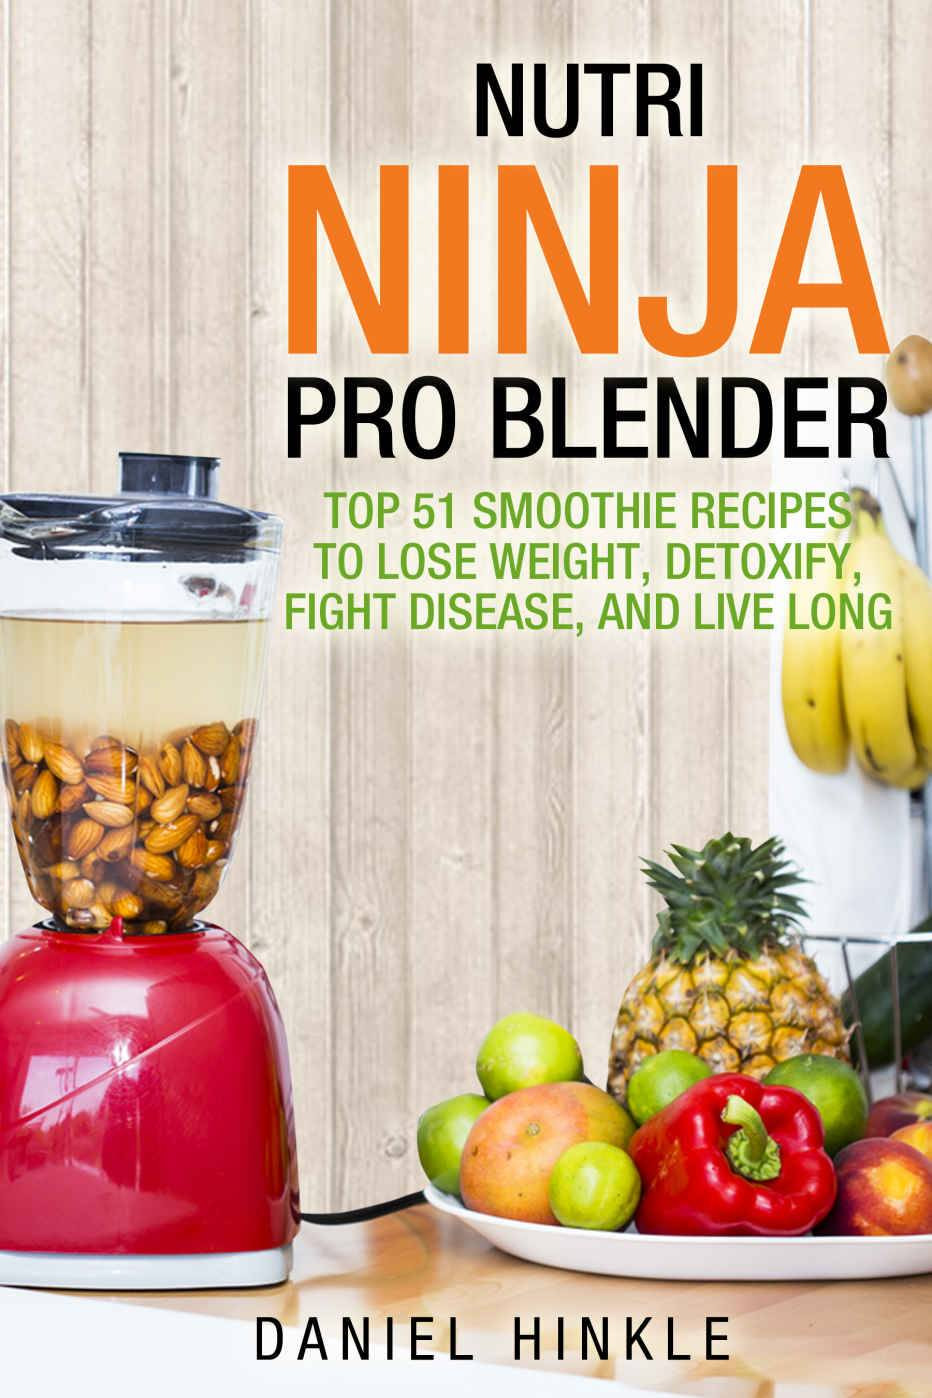 Ninja Smoothies For Weight Loss
 Nutri Ninja Pro Blender Top 51 Smoothie Recipes to Lose